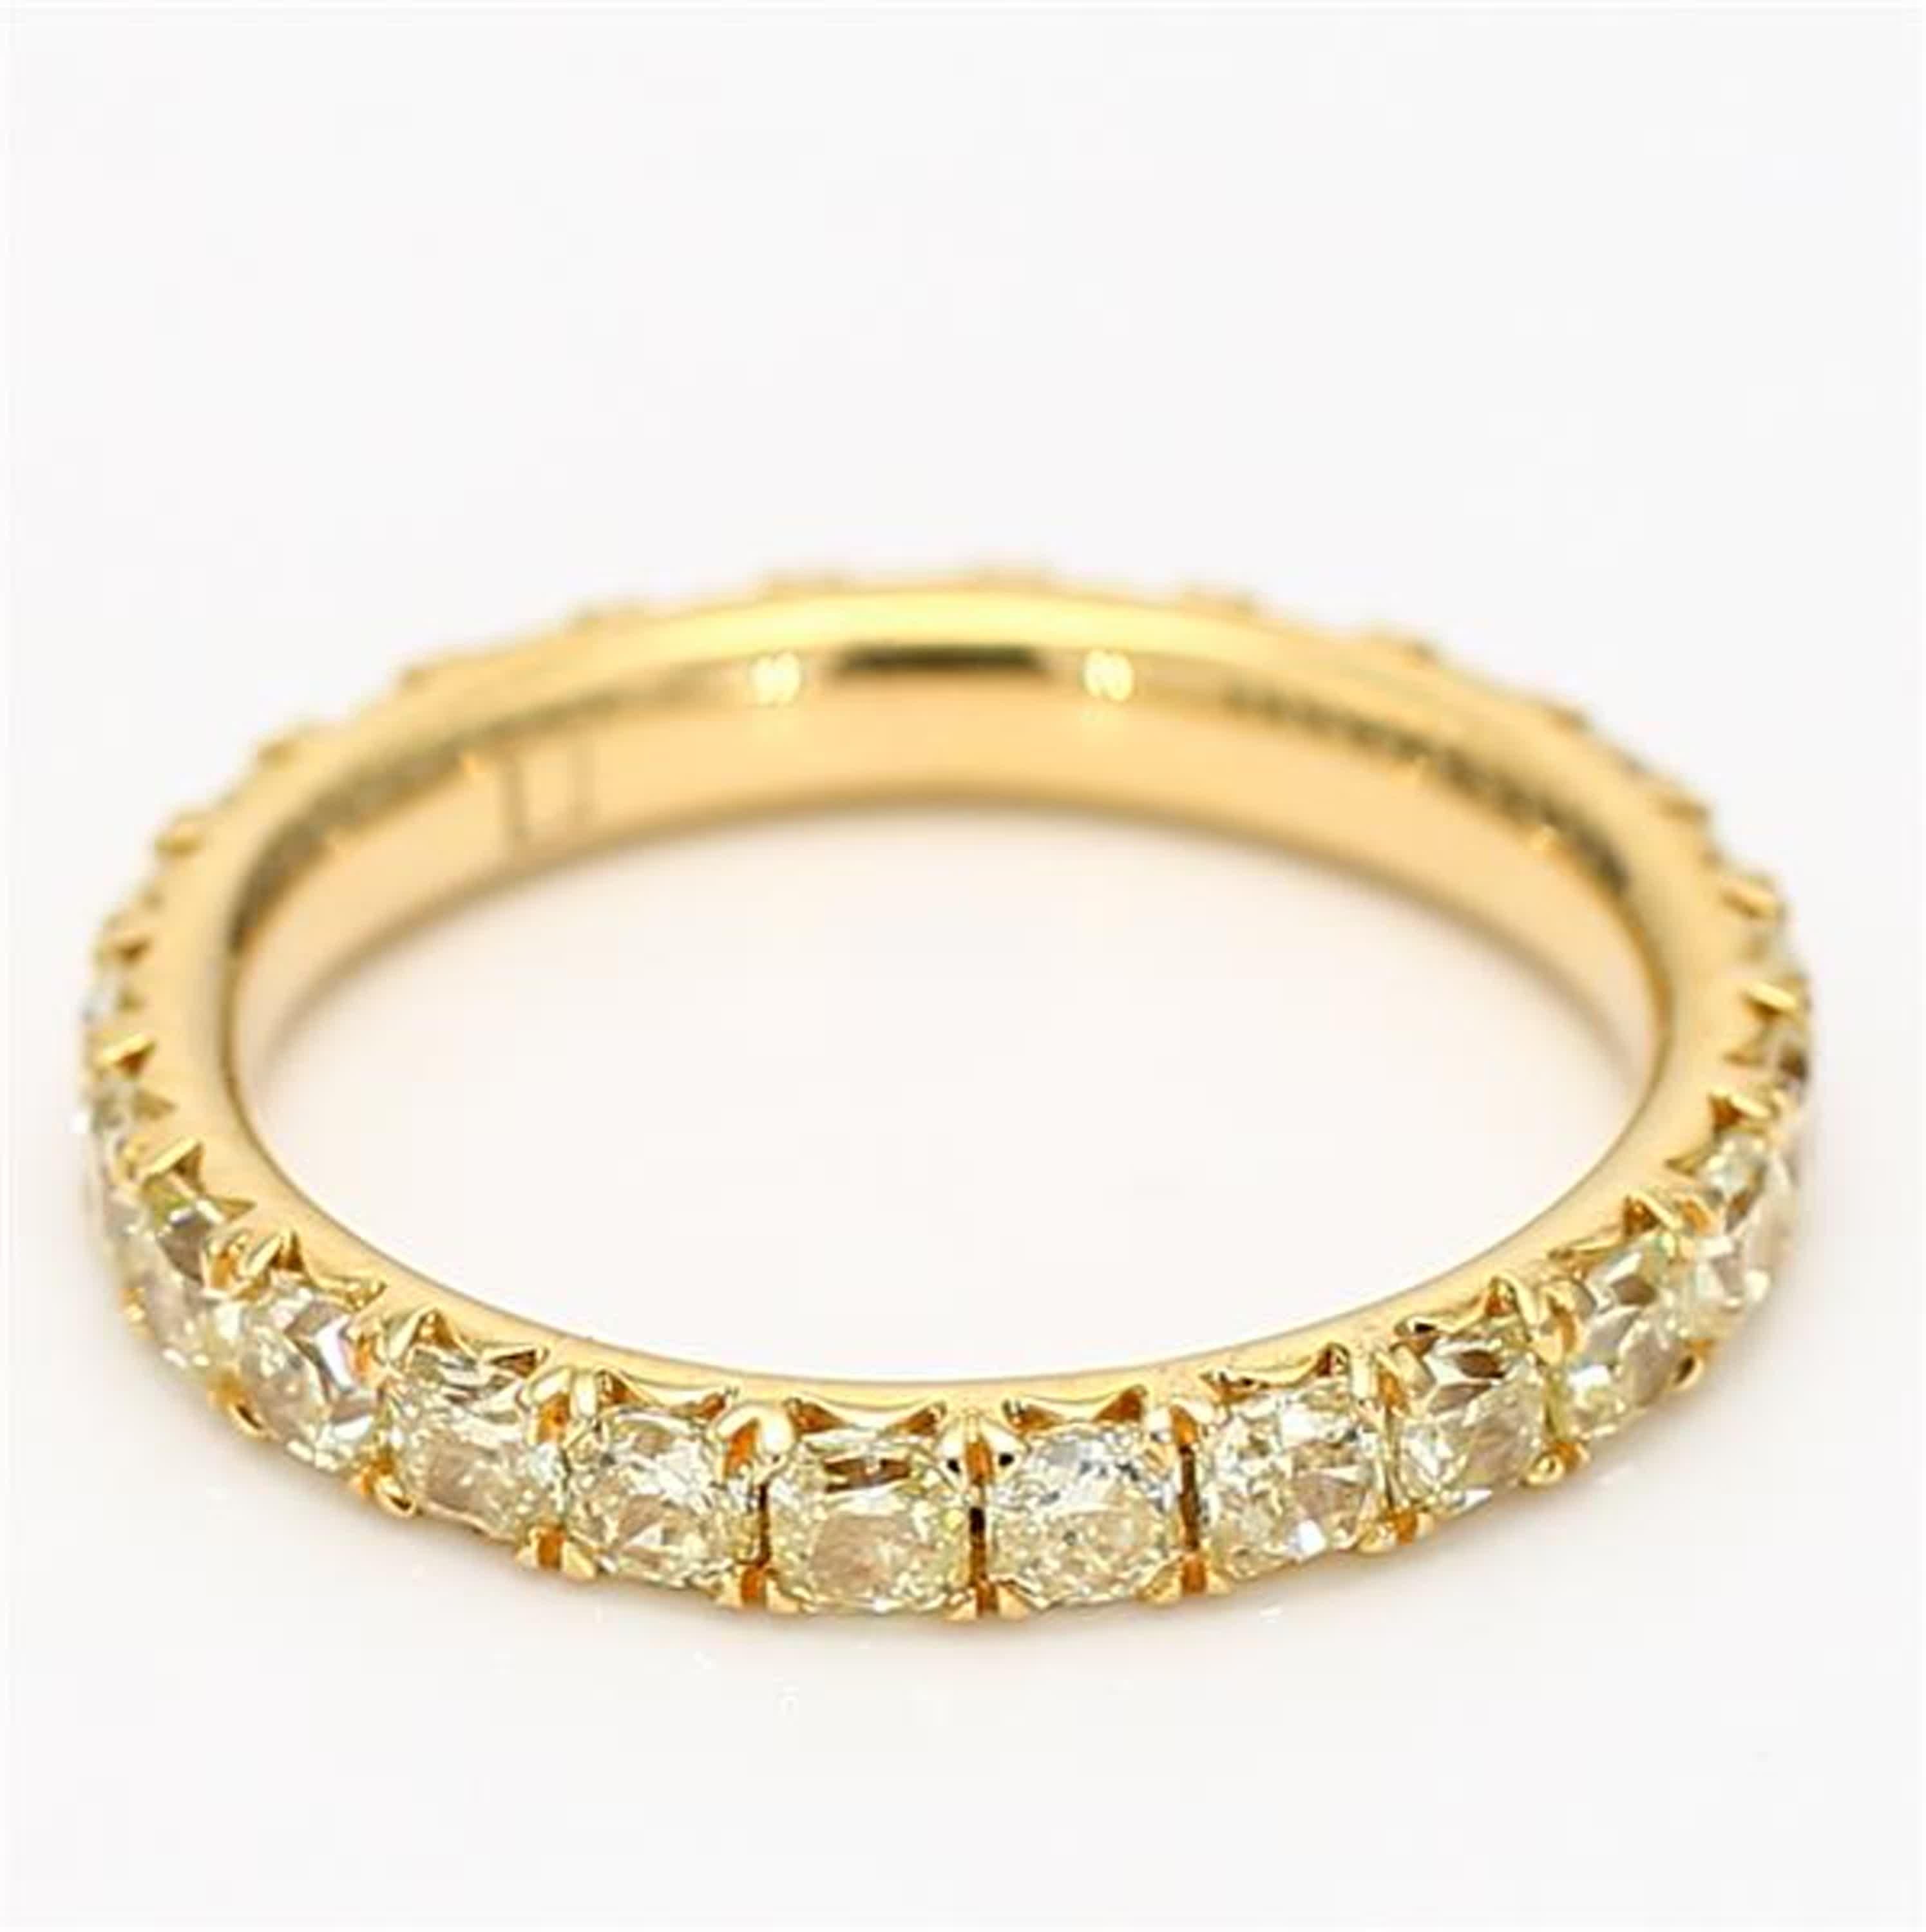 Natural Yellow Radiant Diamond 1.99 Carat TW Yellow Gold Eternity Band For Sale 1